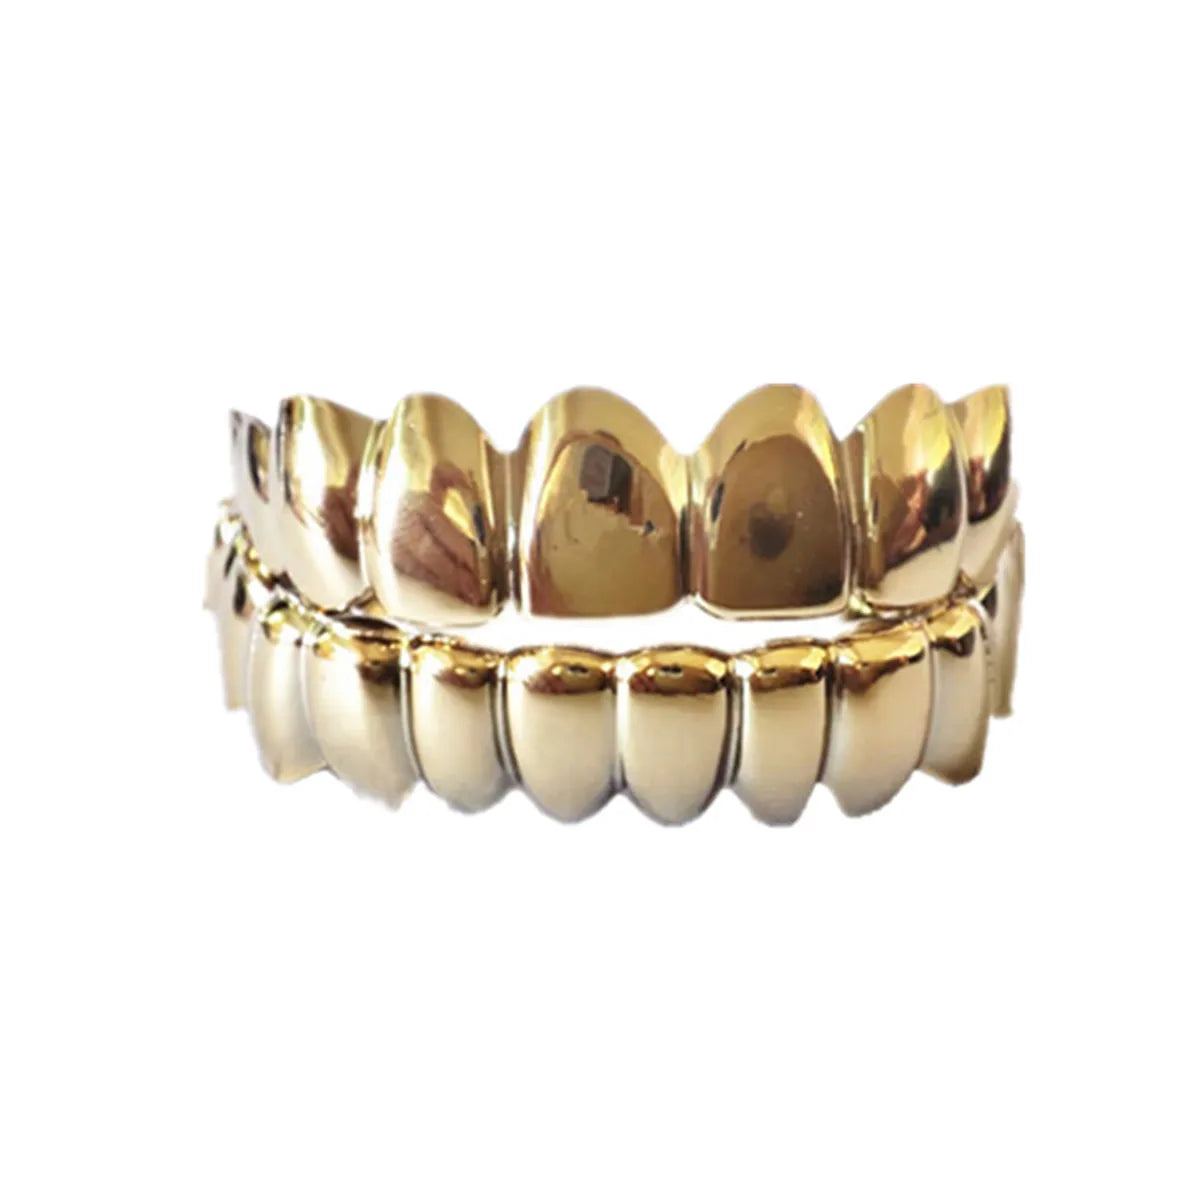 SowSmile Hiphop Gold Silver Real Silicone Gel Snap on Dental False Cover Perfect Smile Veneers Denture Braces Teeth Grillz HQT Super Store